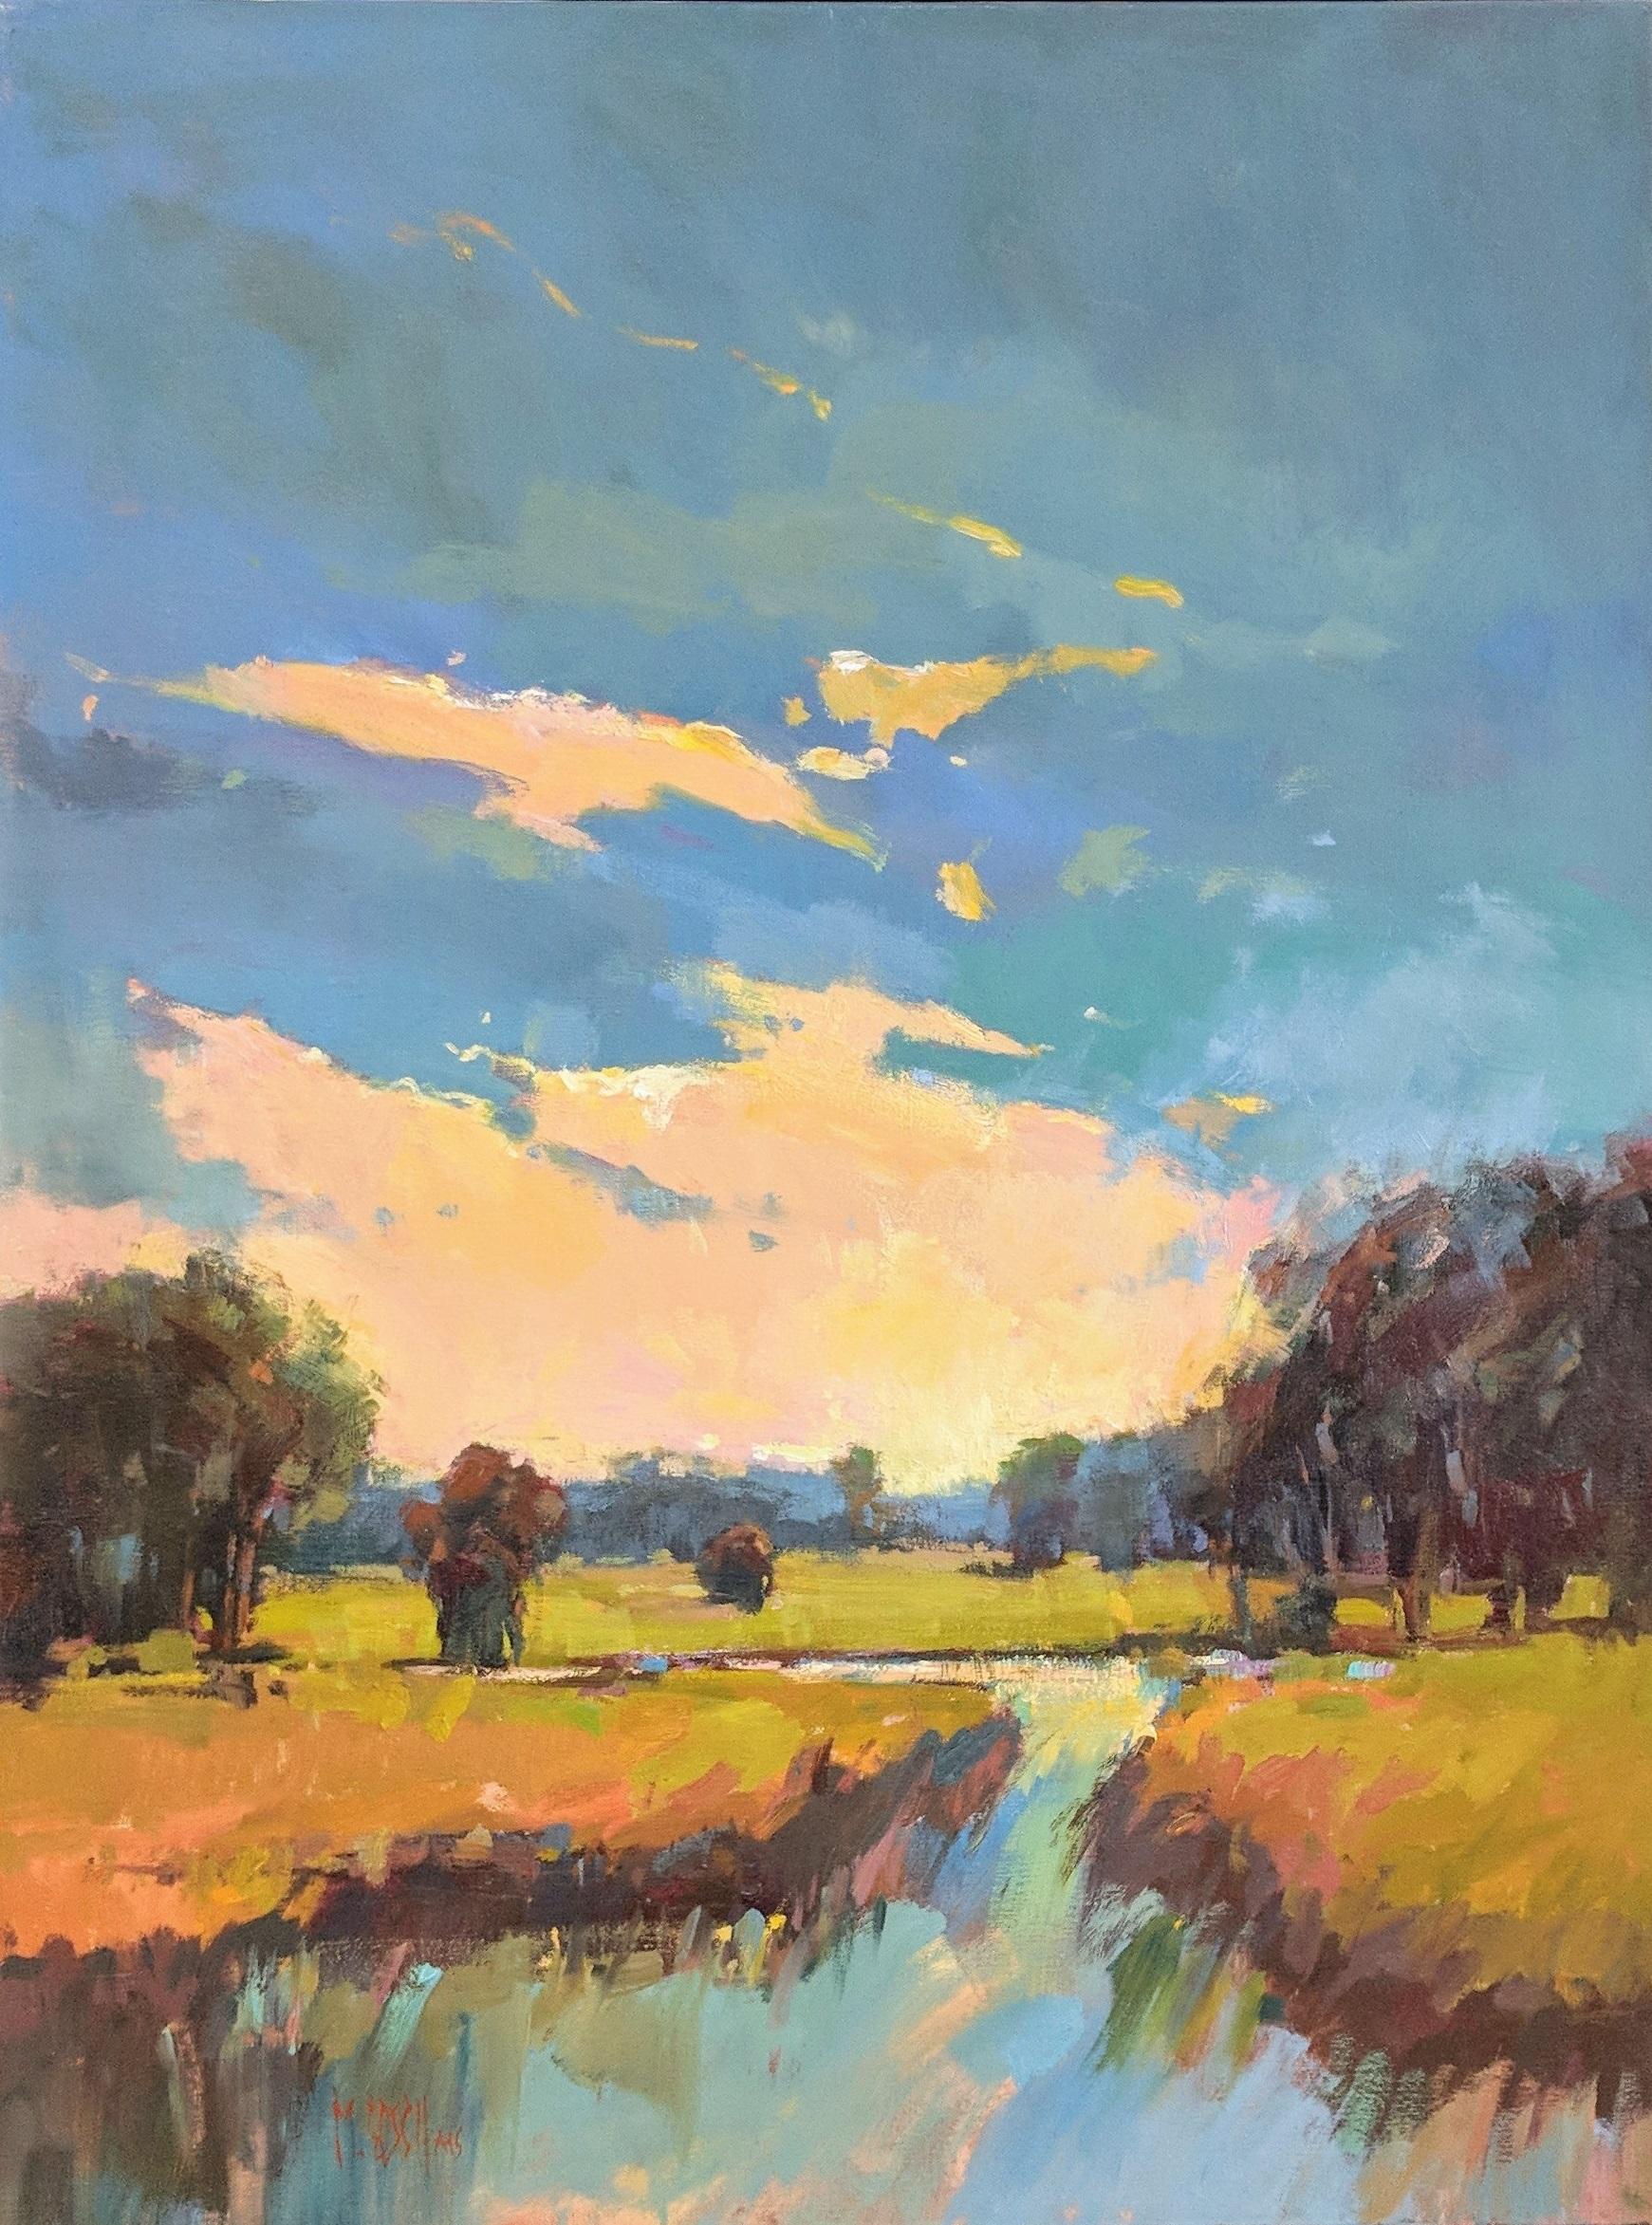 'Summer Glory' is a framed Impressionist plein air landscape painting created by American artist Millie Gosch in 2018. Featuring a rich palette mostly made of blue, orange, green, yellow and black tones, this oil on canvas painting depicts an